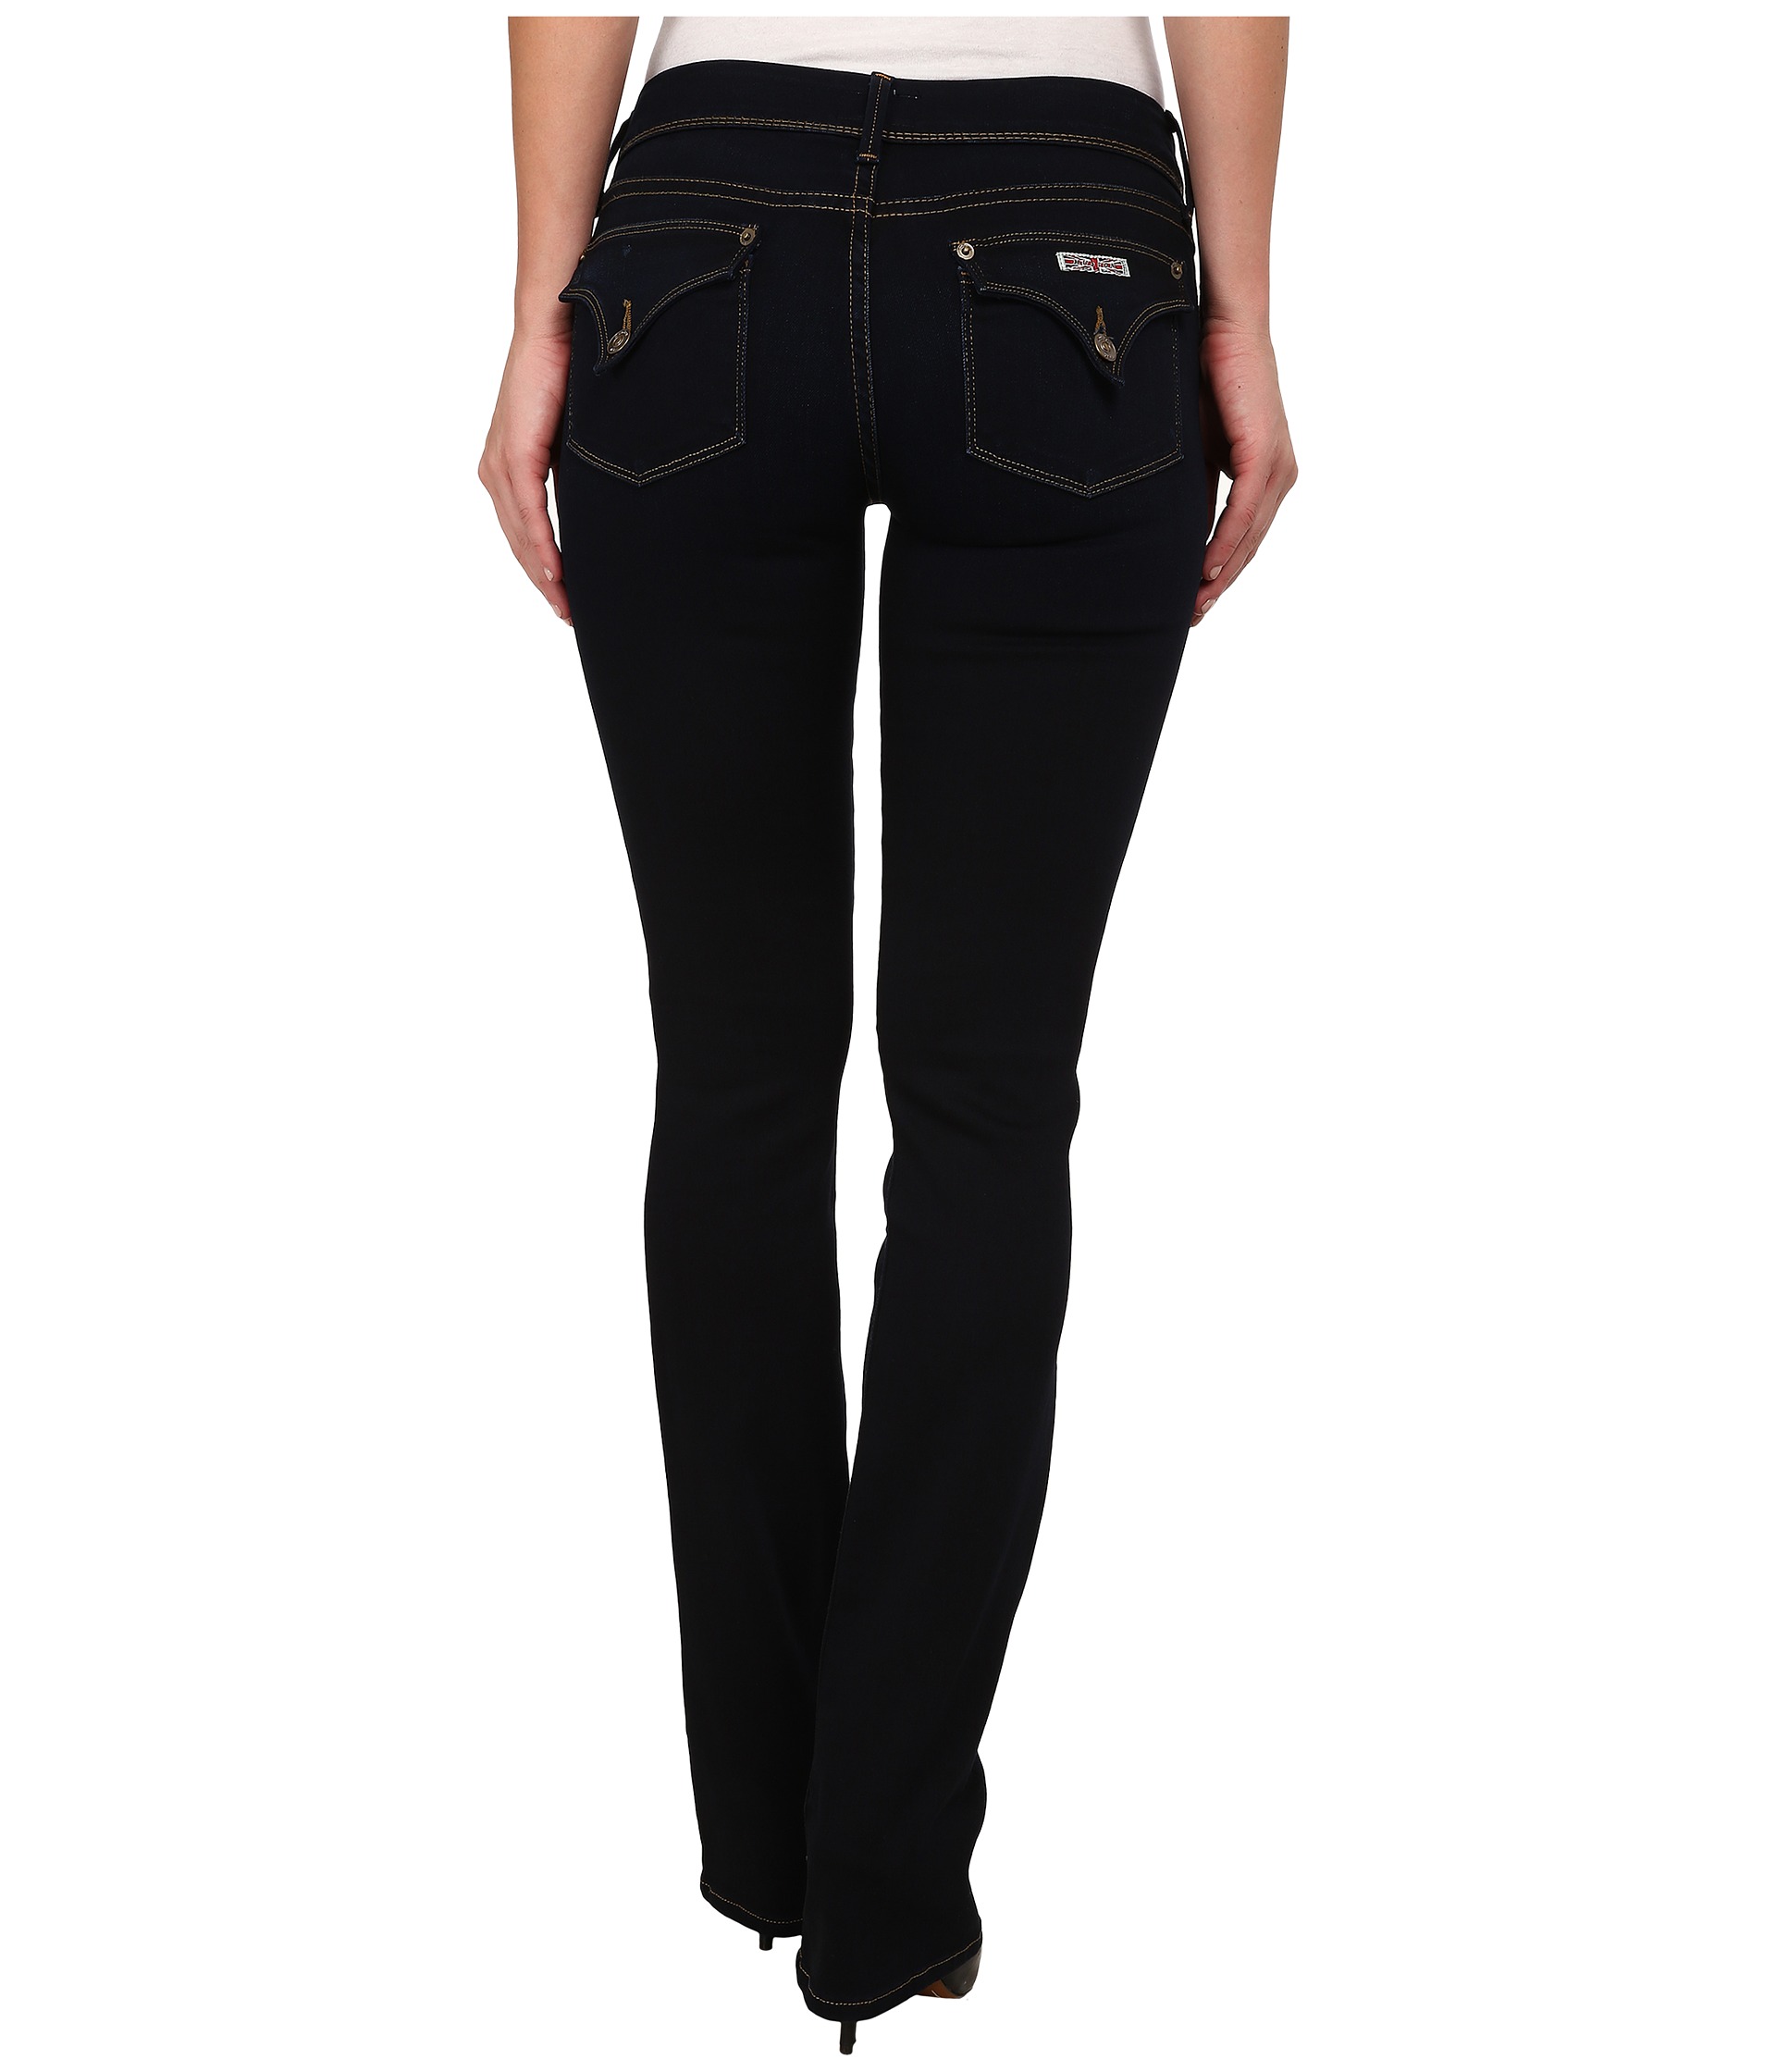 Hudson Beth Mid Rise Baby Boot Jeans in Delilah at Zappos.com